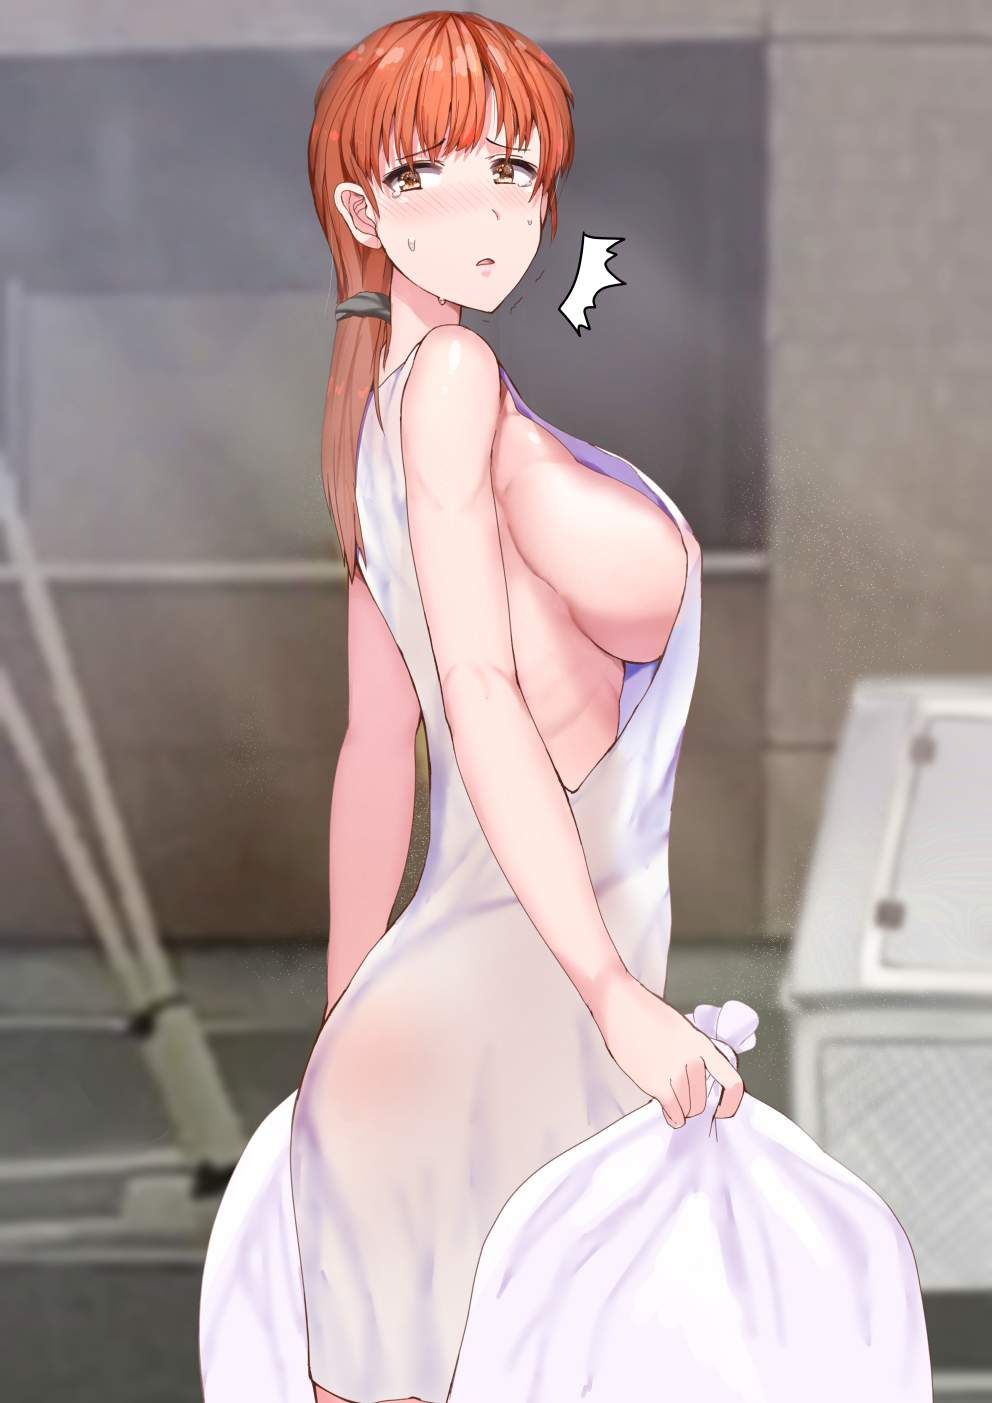 【Morning Eros】Secondary erotic image of a girl throwing away the garbage 37